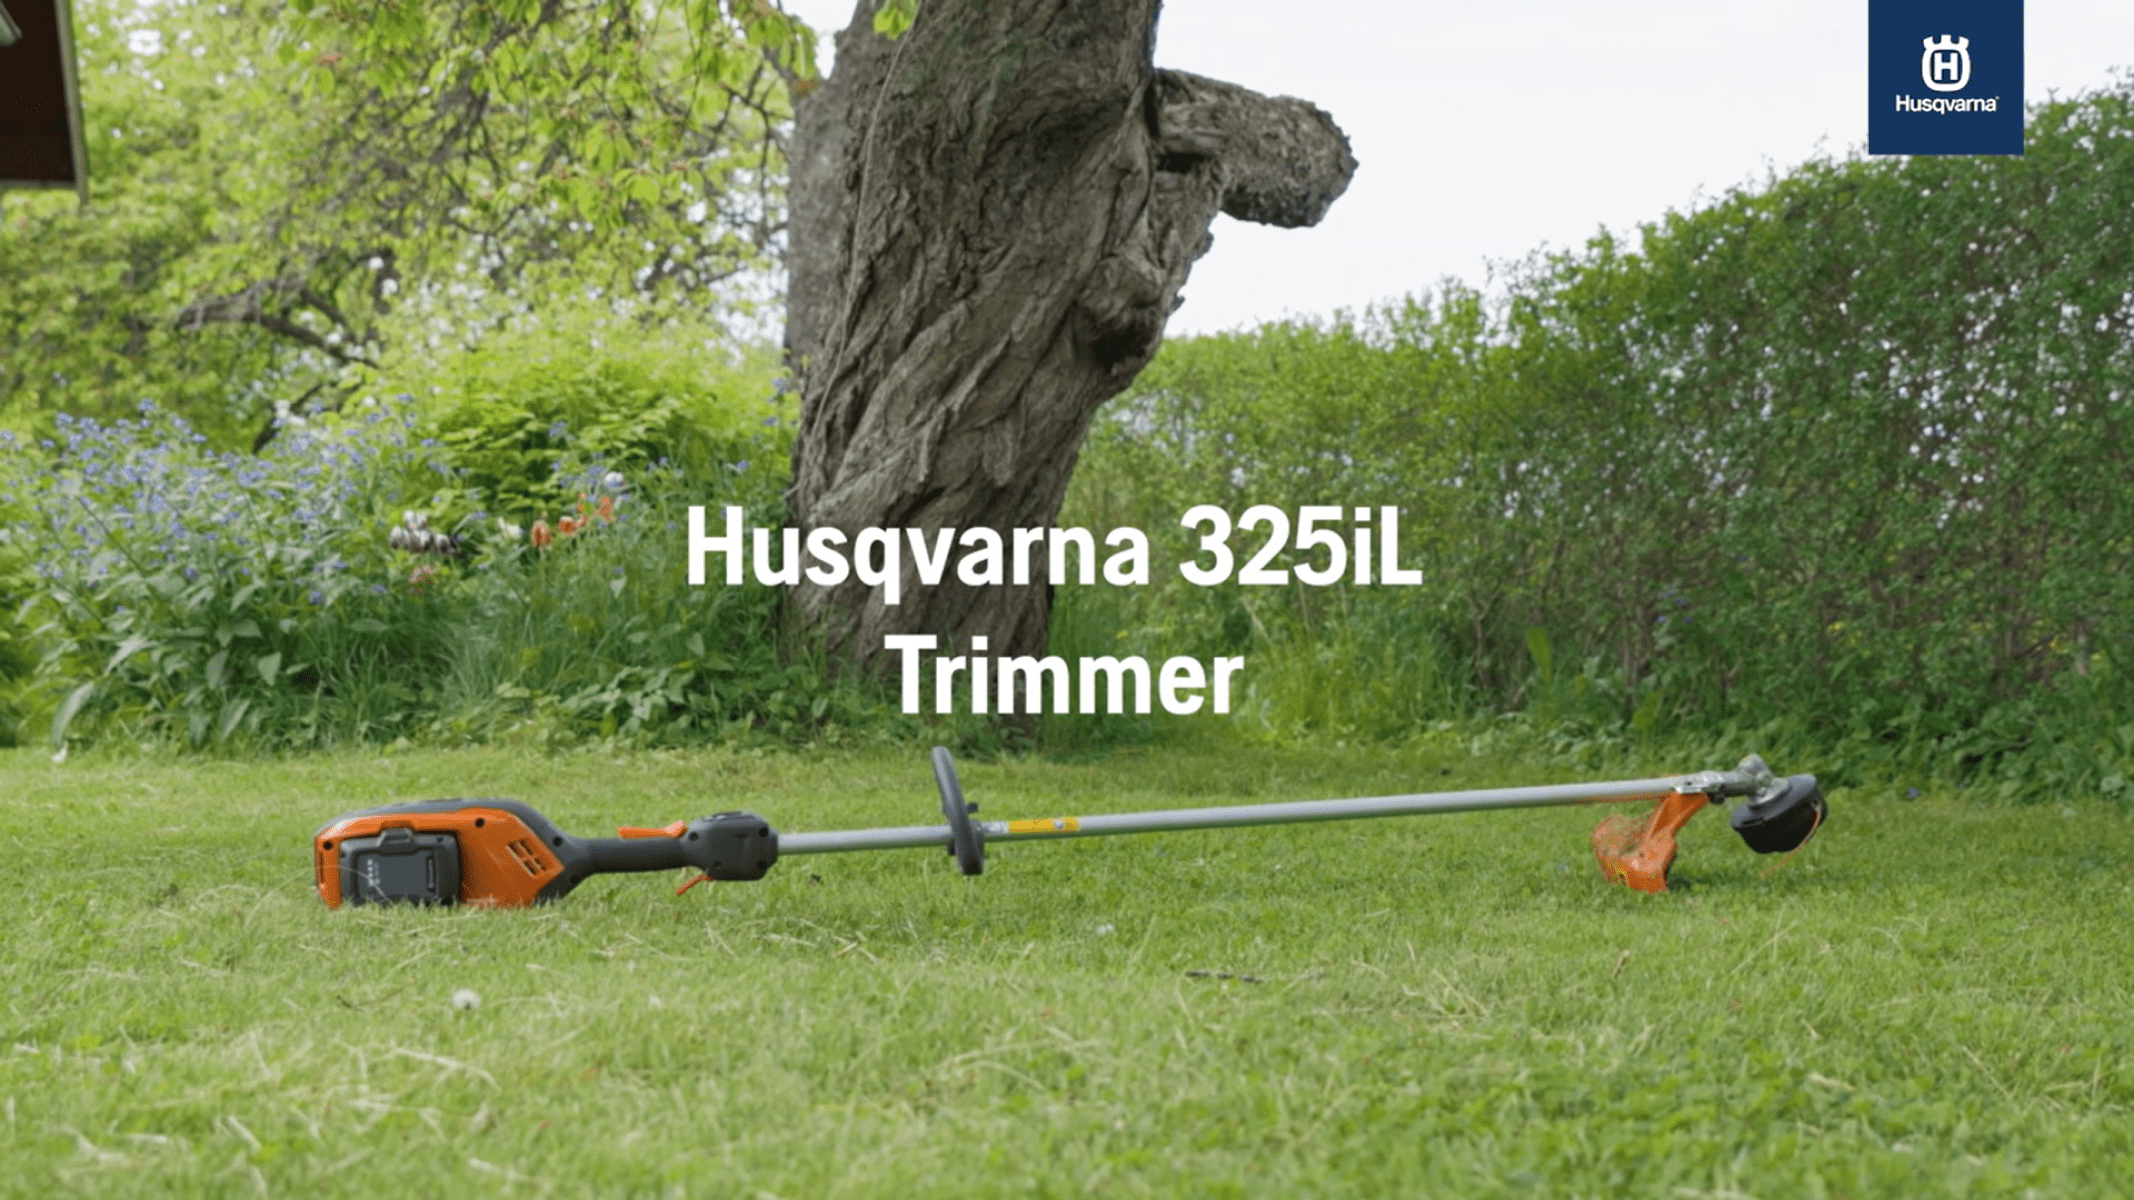 Features and how to use Husqvarna 325iL Trimmer 56s 16:9 MASTER